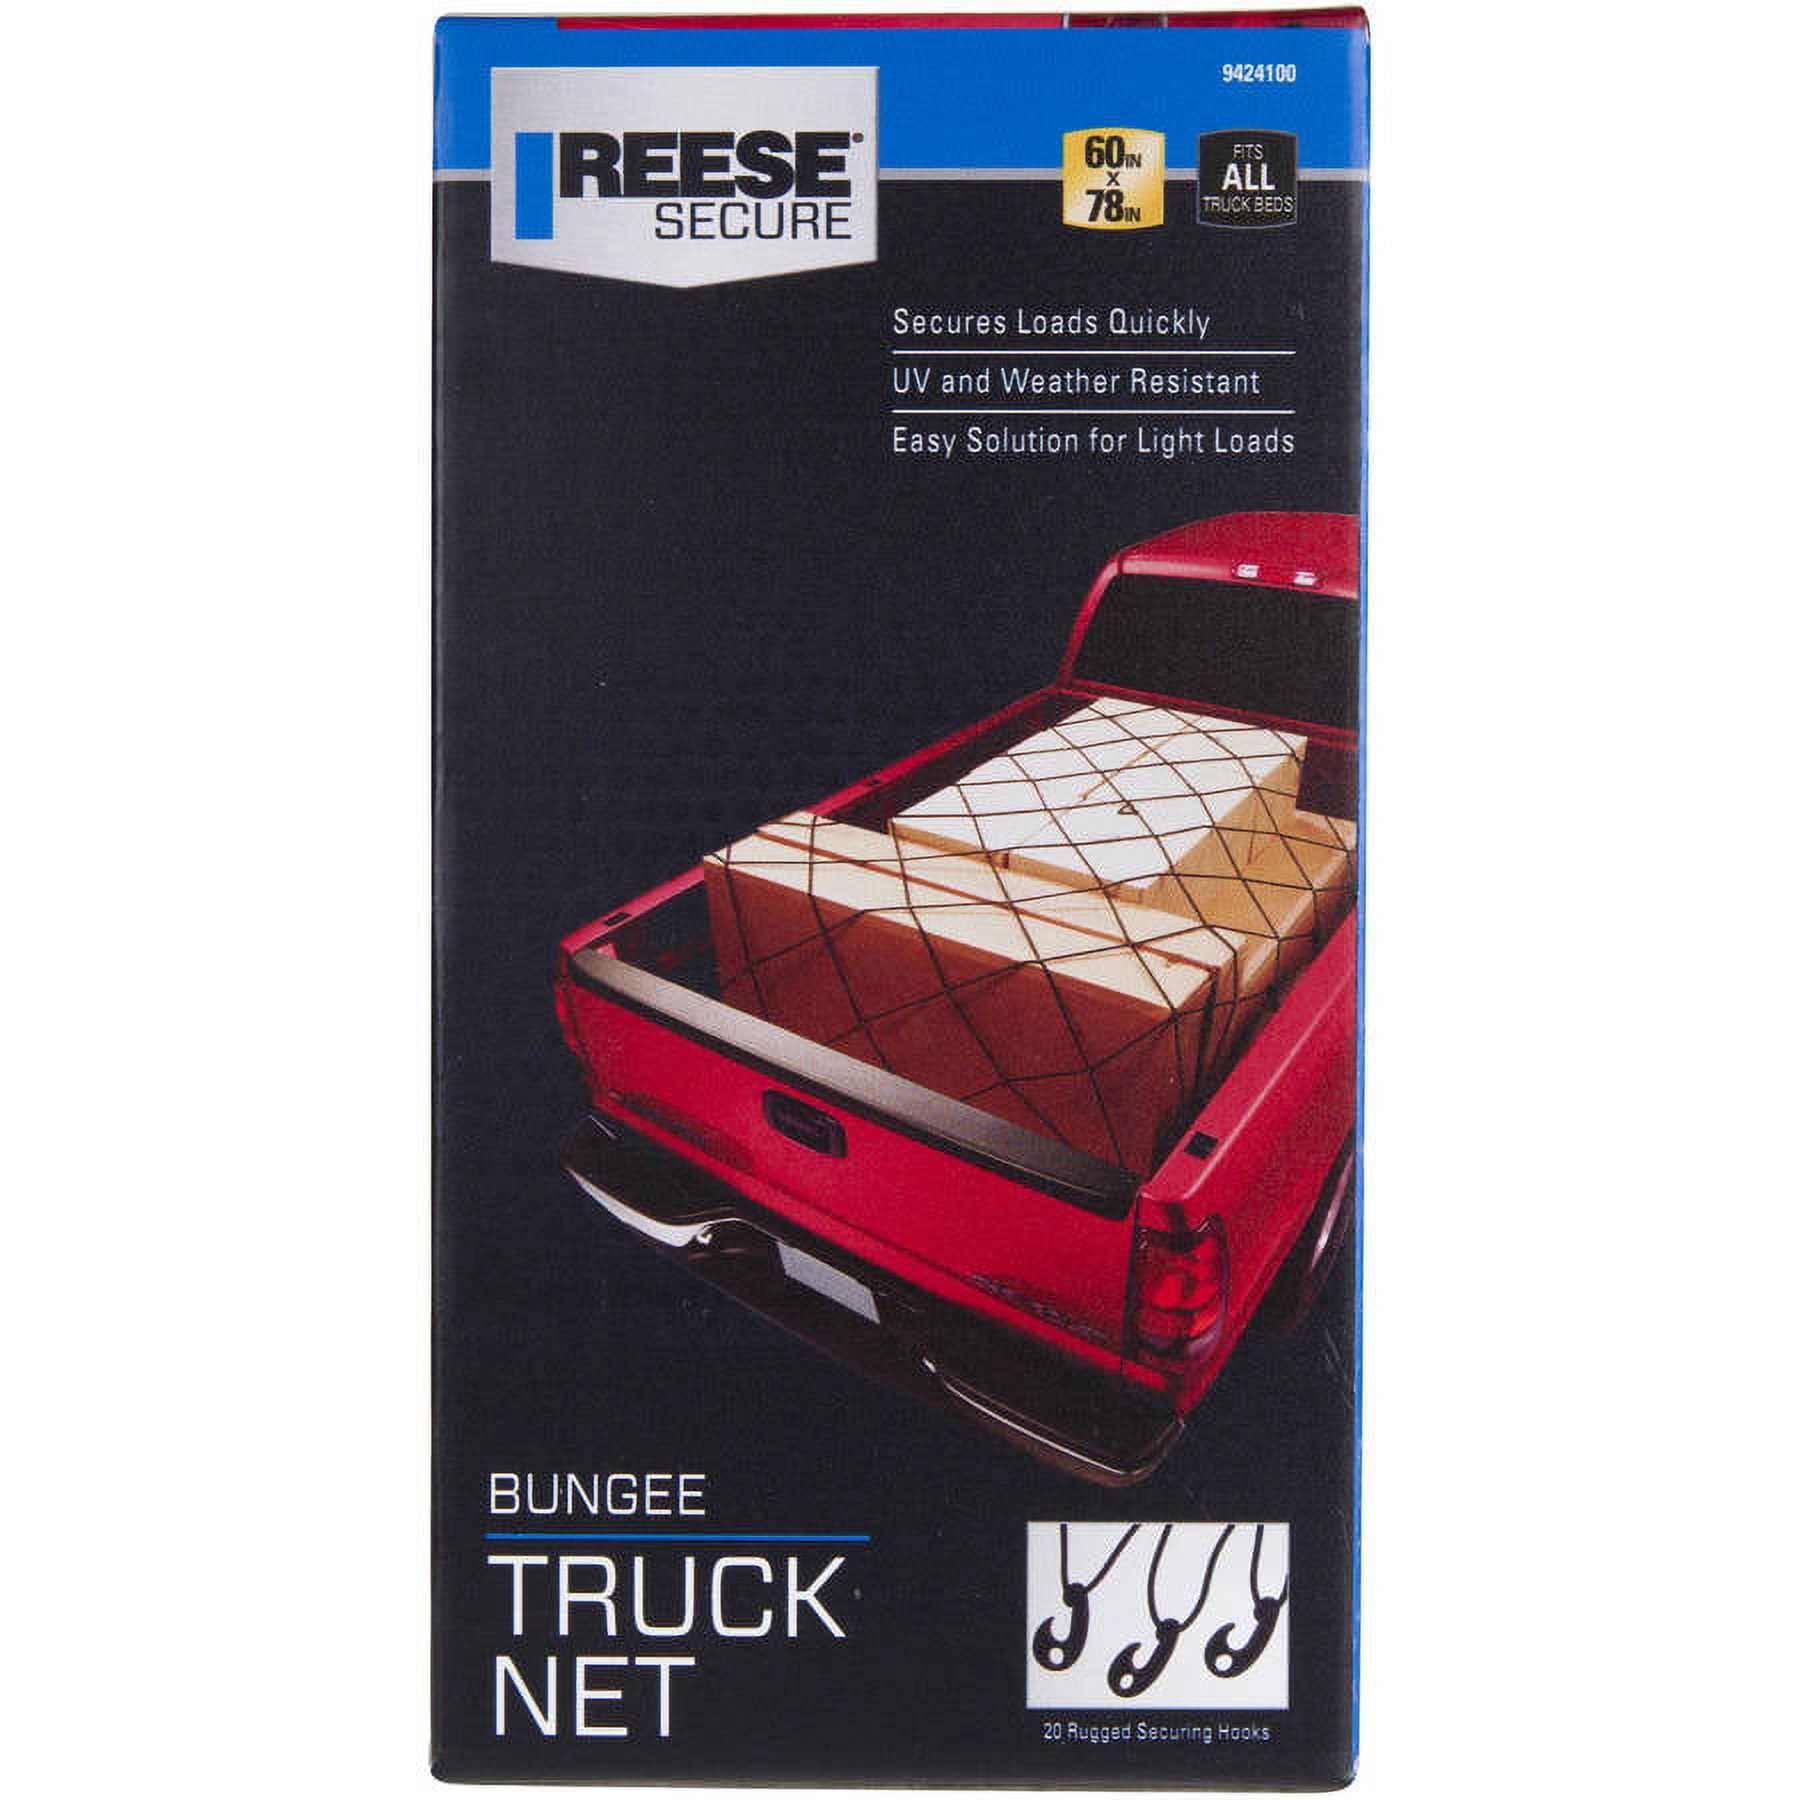 Reese Secure Carry Power Bungee Truck Net - image 3 of 4